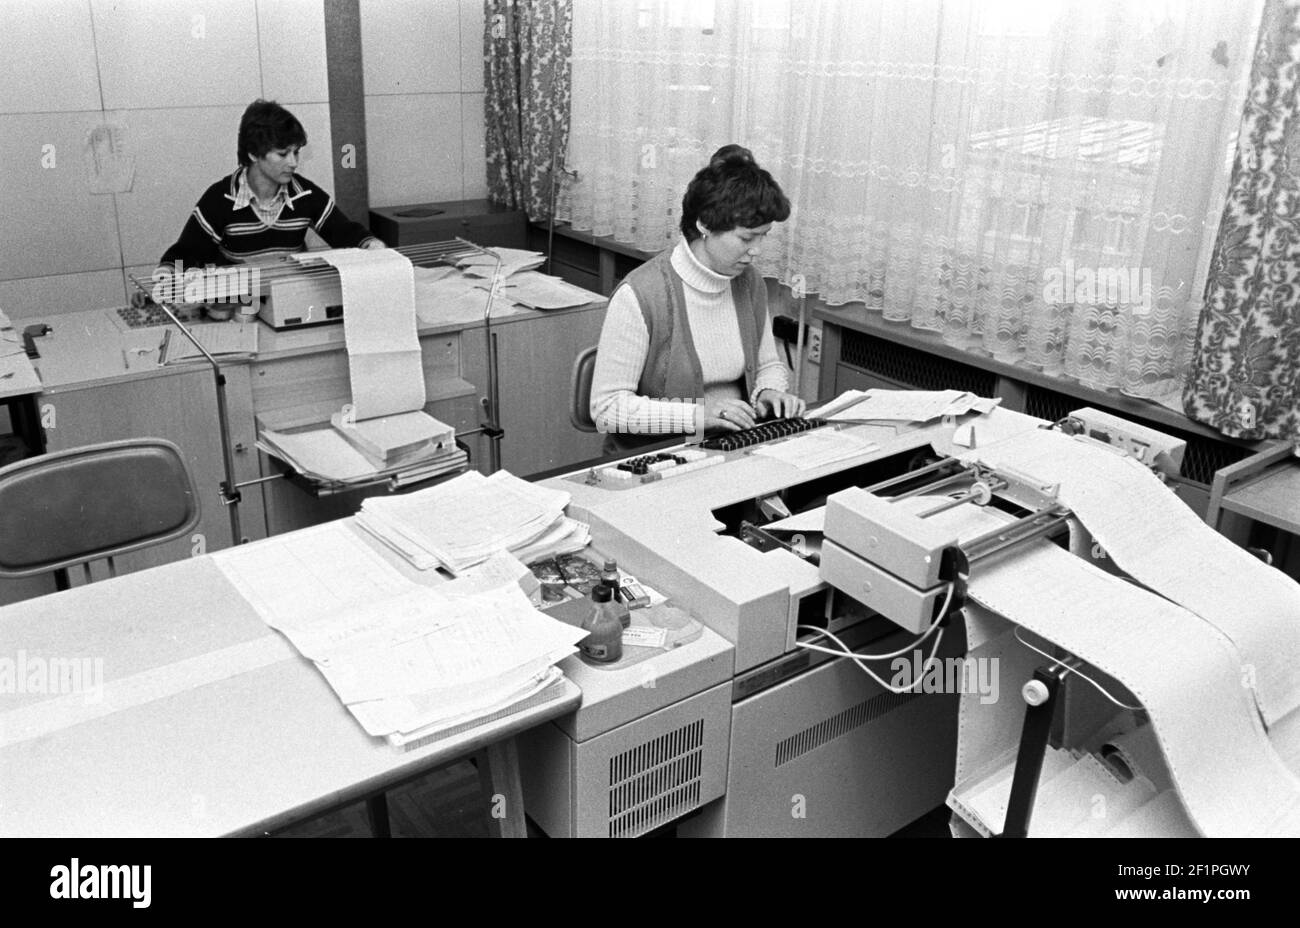 15 October 1981, Saxony, Delitzsch: Women working in a microelectronics laboratory at the end of 1981. Exact date of photograph not known. Photo: Volkmar Heinz/dpa-Zentralbild/ZB Stock Photo